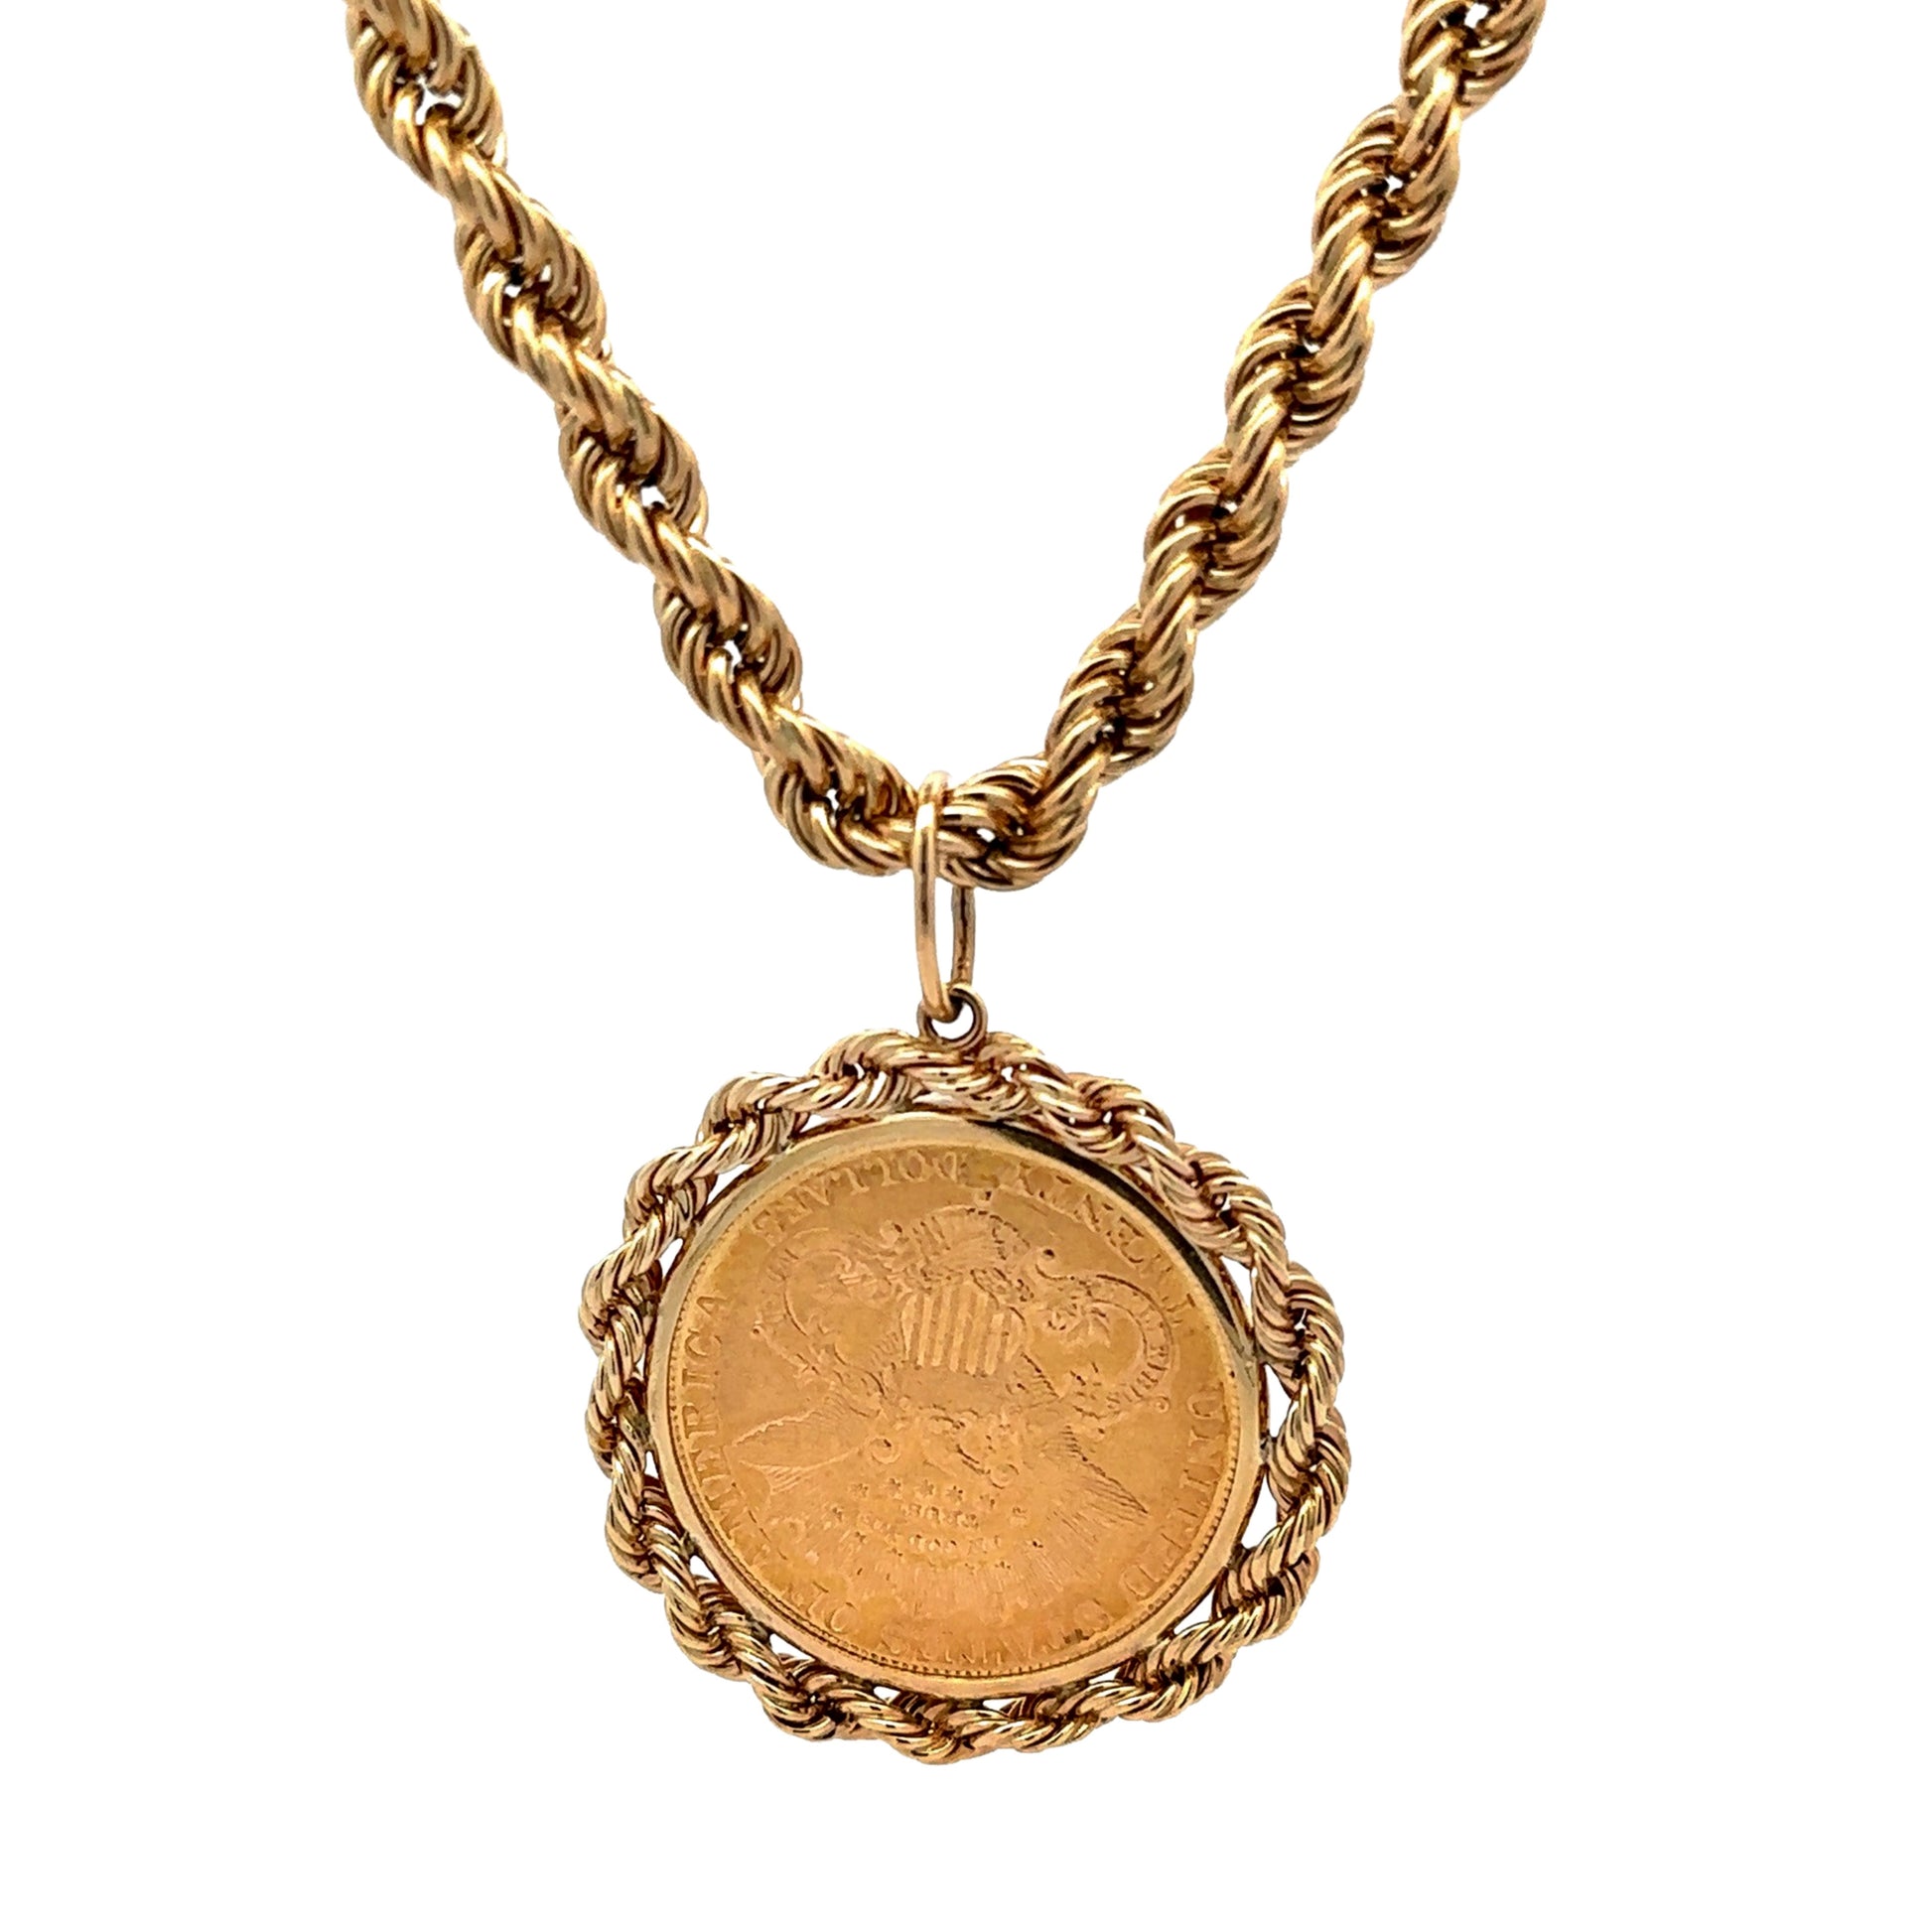 Back of coin pendant with yellow gold rope chain + yellow gold rope detailing around coin